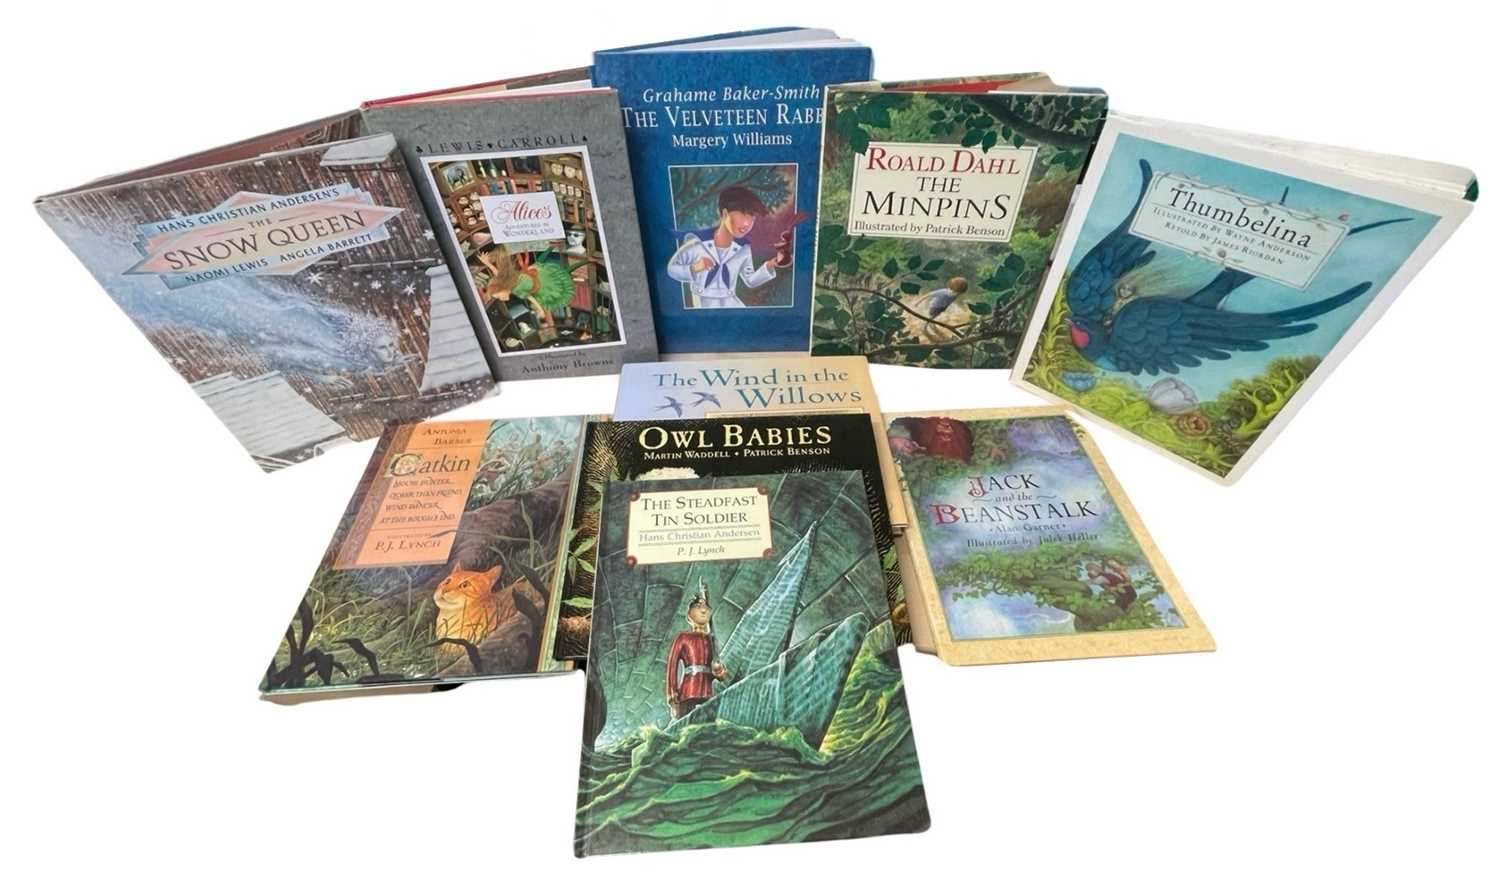 Mixed children's classic first editions: KENNETH GRAHAME AND MICHAEL FOREMAN (Illus. - inscribed